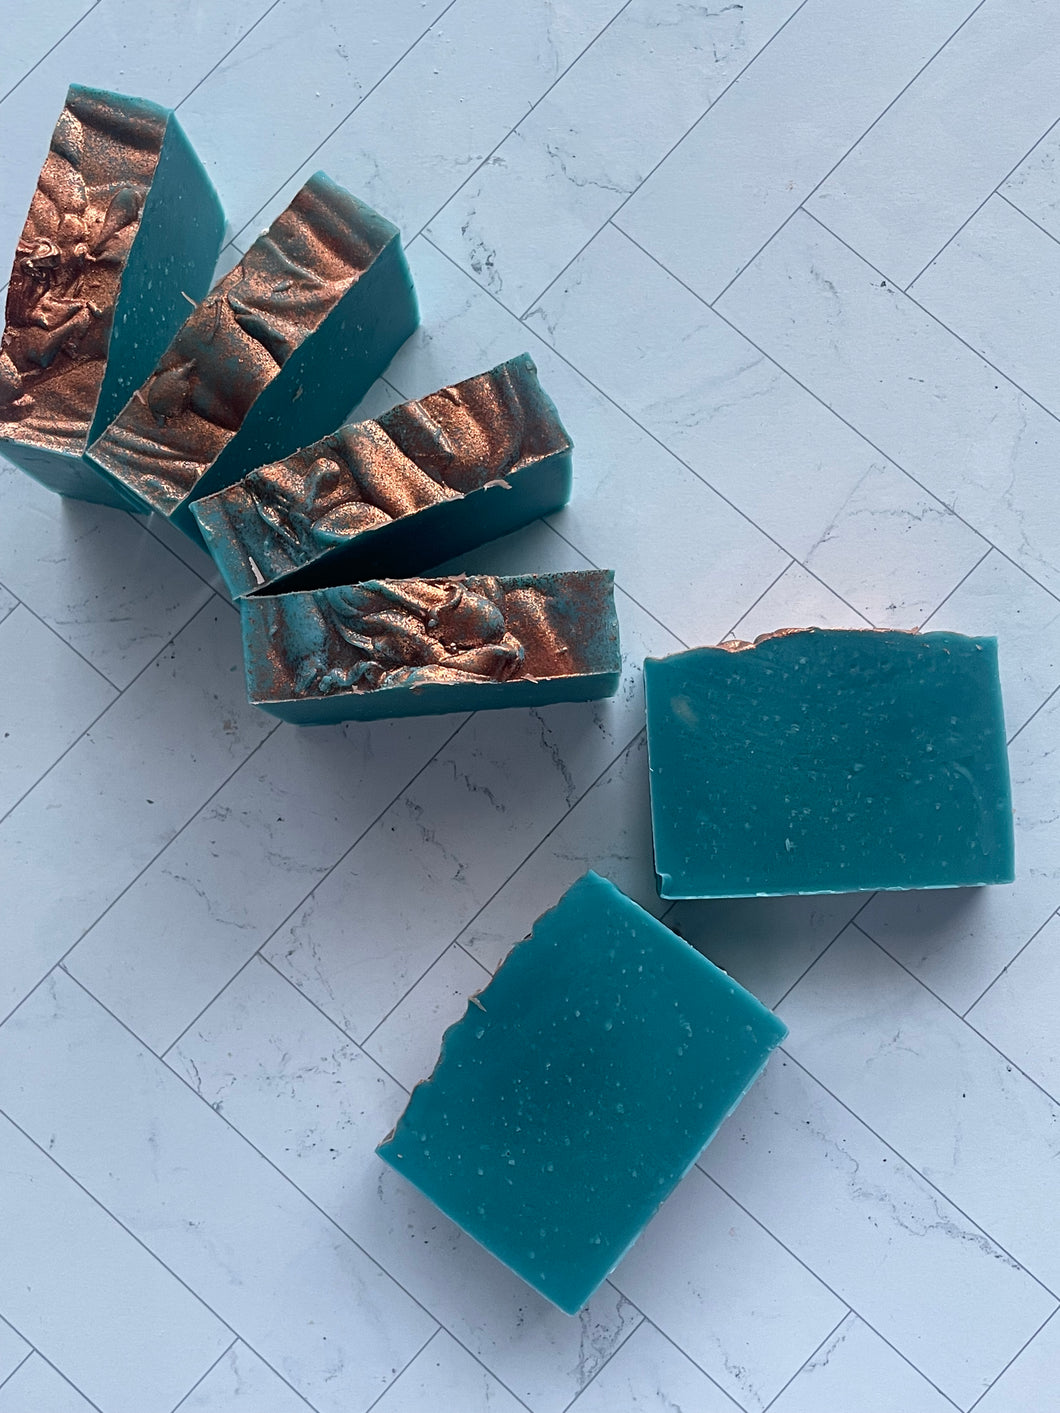 SHEER HANDCRAFTED SOAP (Coconut Free)